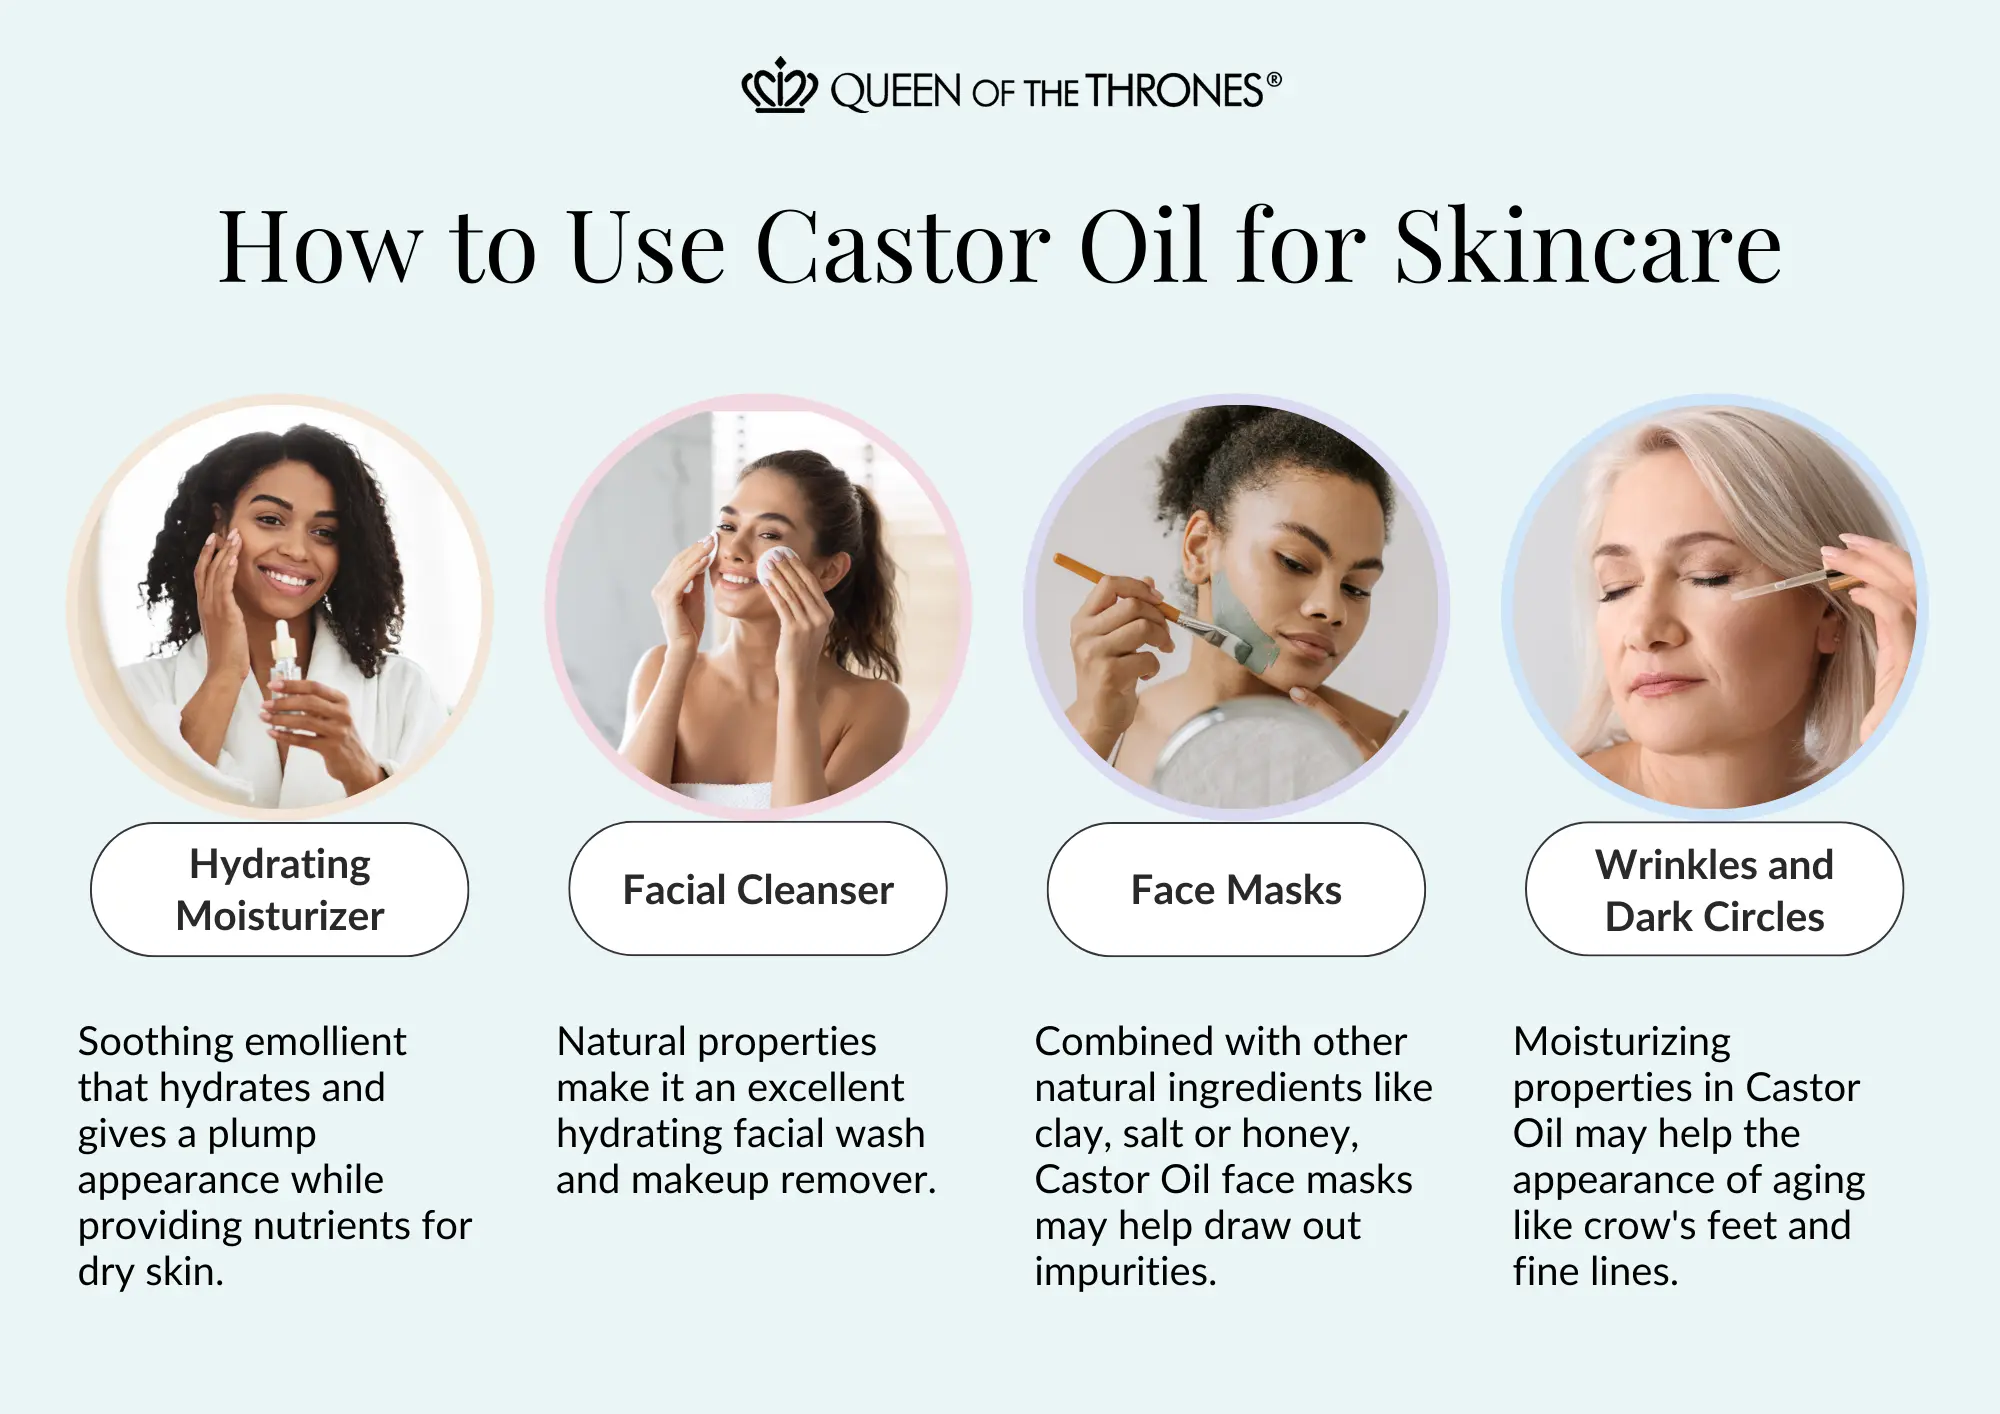 How to use Castor oil for skin care by Queen of the Thrones 